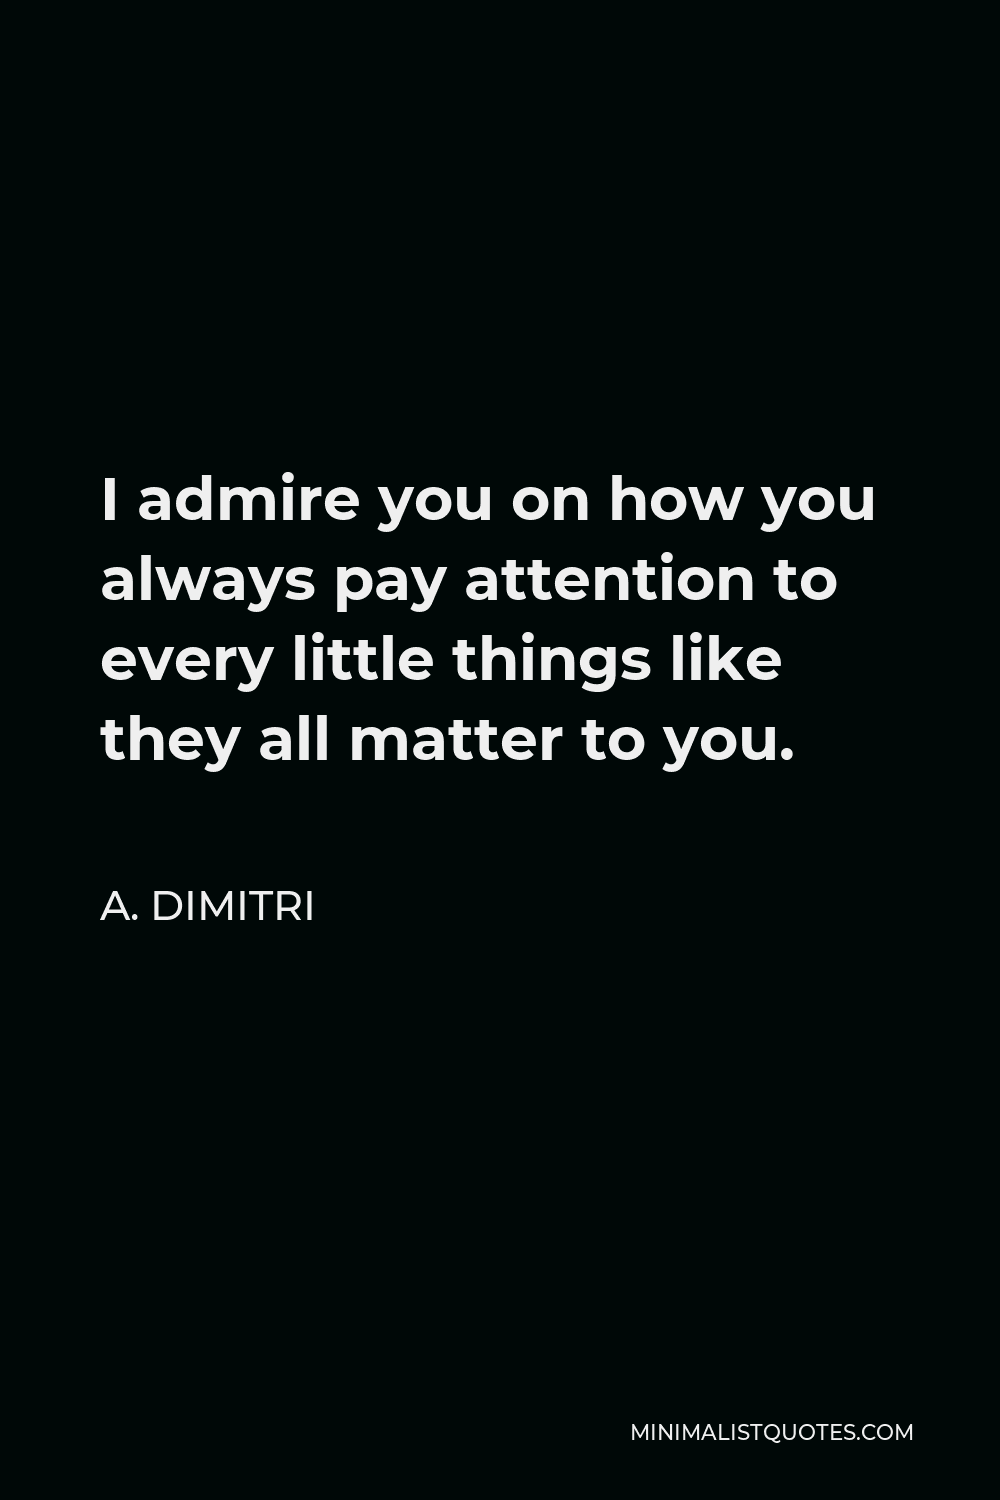 A. Dimitri Quote - I admire you on how you always pay attention to every little things like they all matter to you.